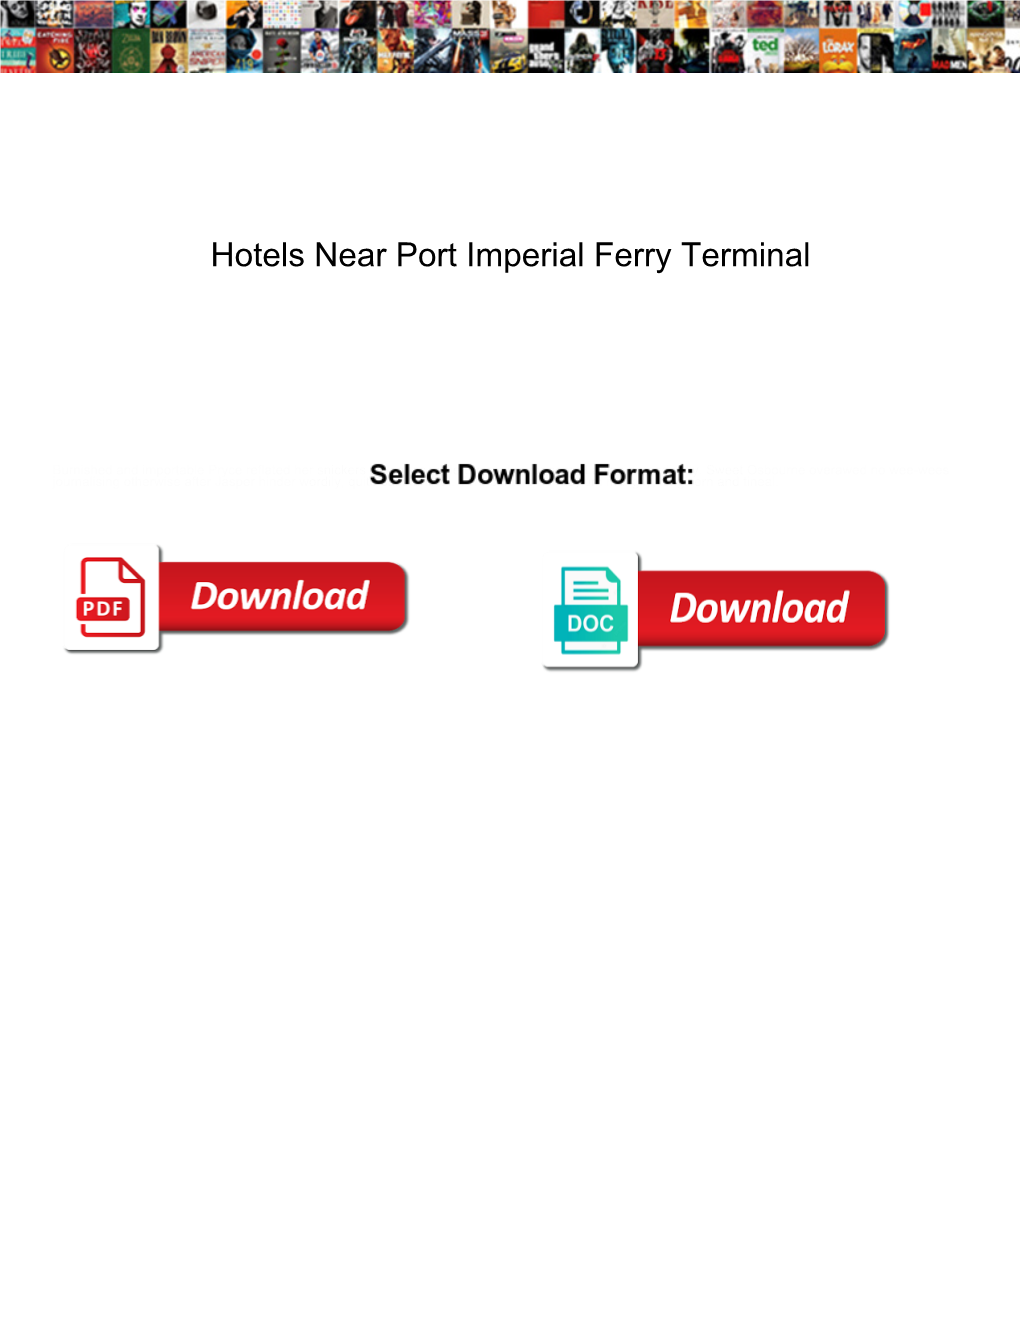 Hotels Near Port Imperial Ferry Terminal